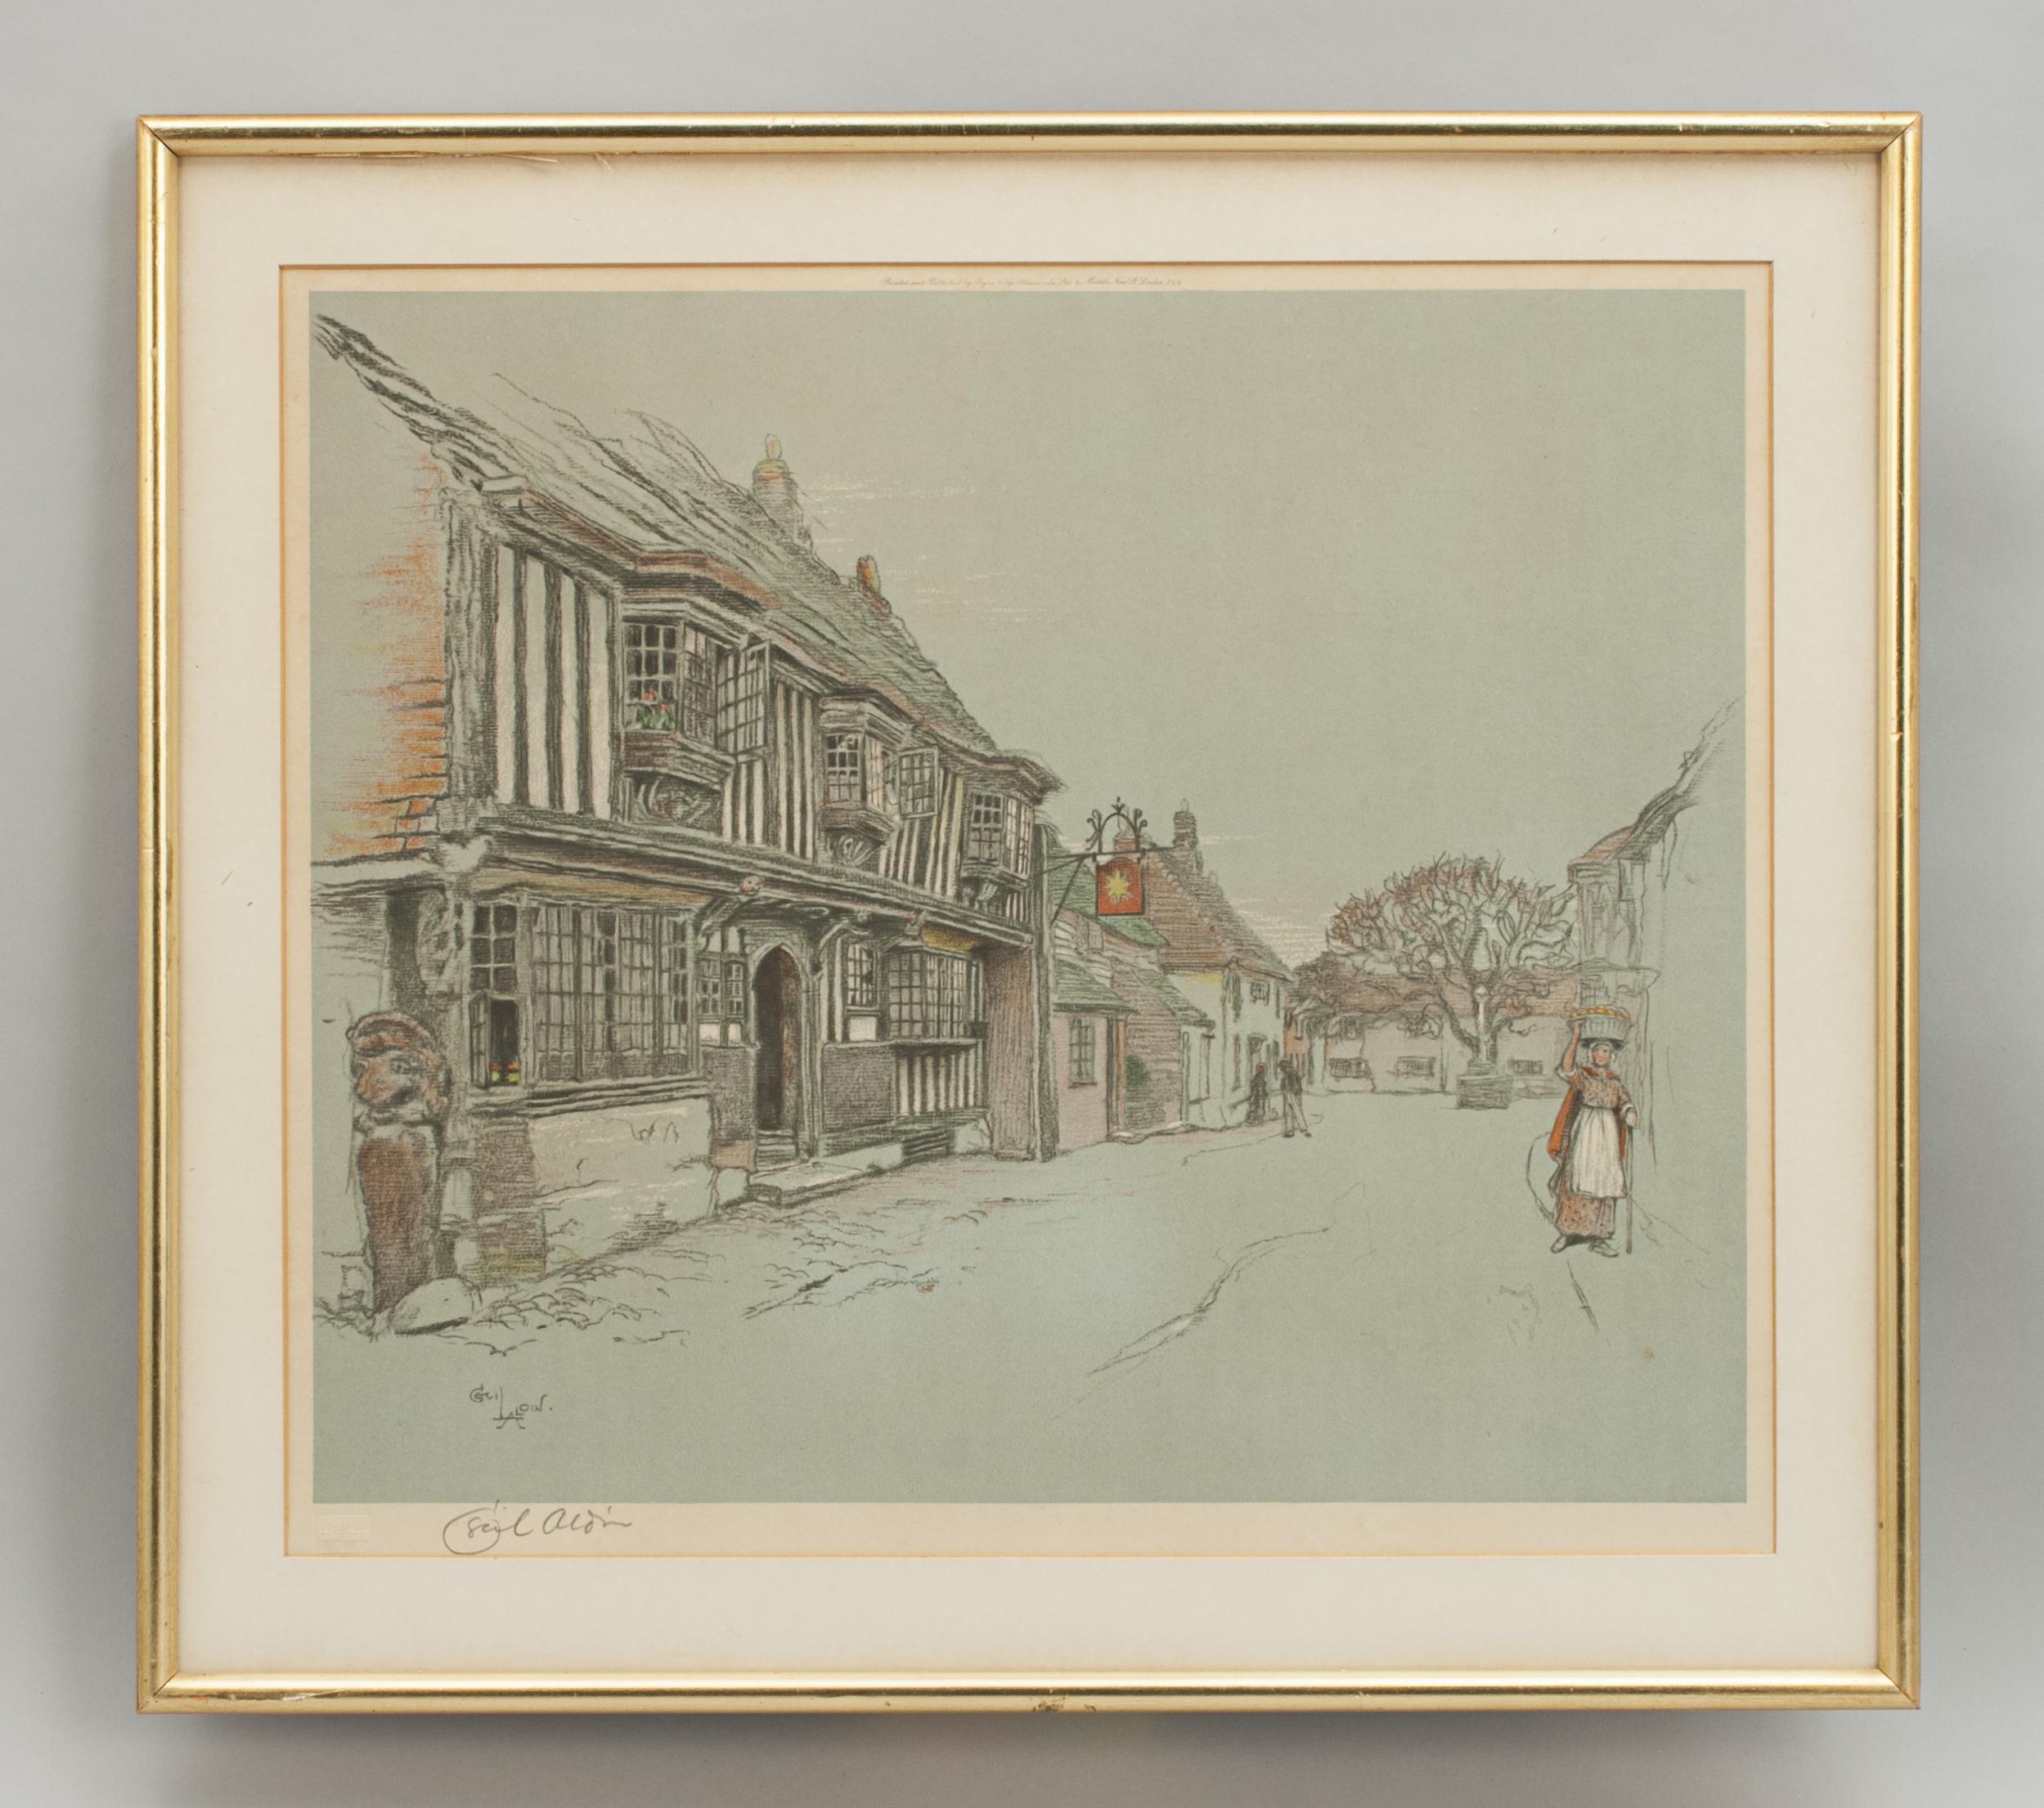 Cecil Aldin, Old Inns, The Star Inn.
A very nice colourful framed chromolithograph by Cecil Aldin of The Star Inn, Alfriston, Sussex. The print is printed and published by Eyre & Spottiswoode, Ltd., 4 Middle New Street, London, E.C.4. and signed in